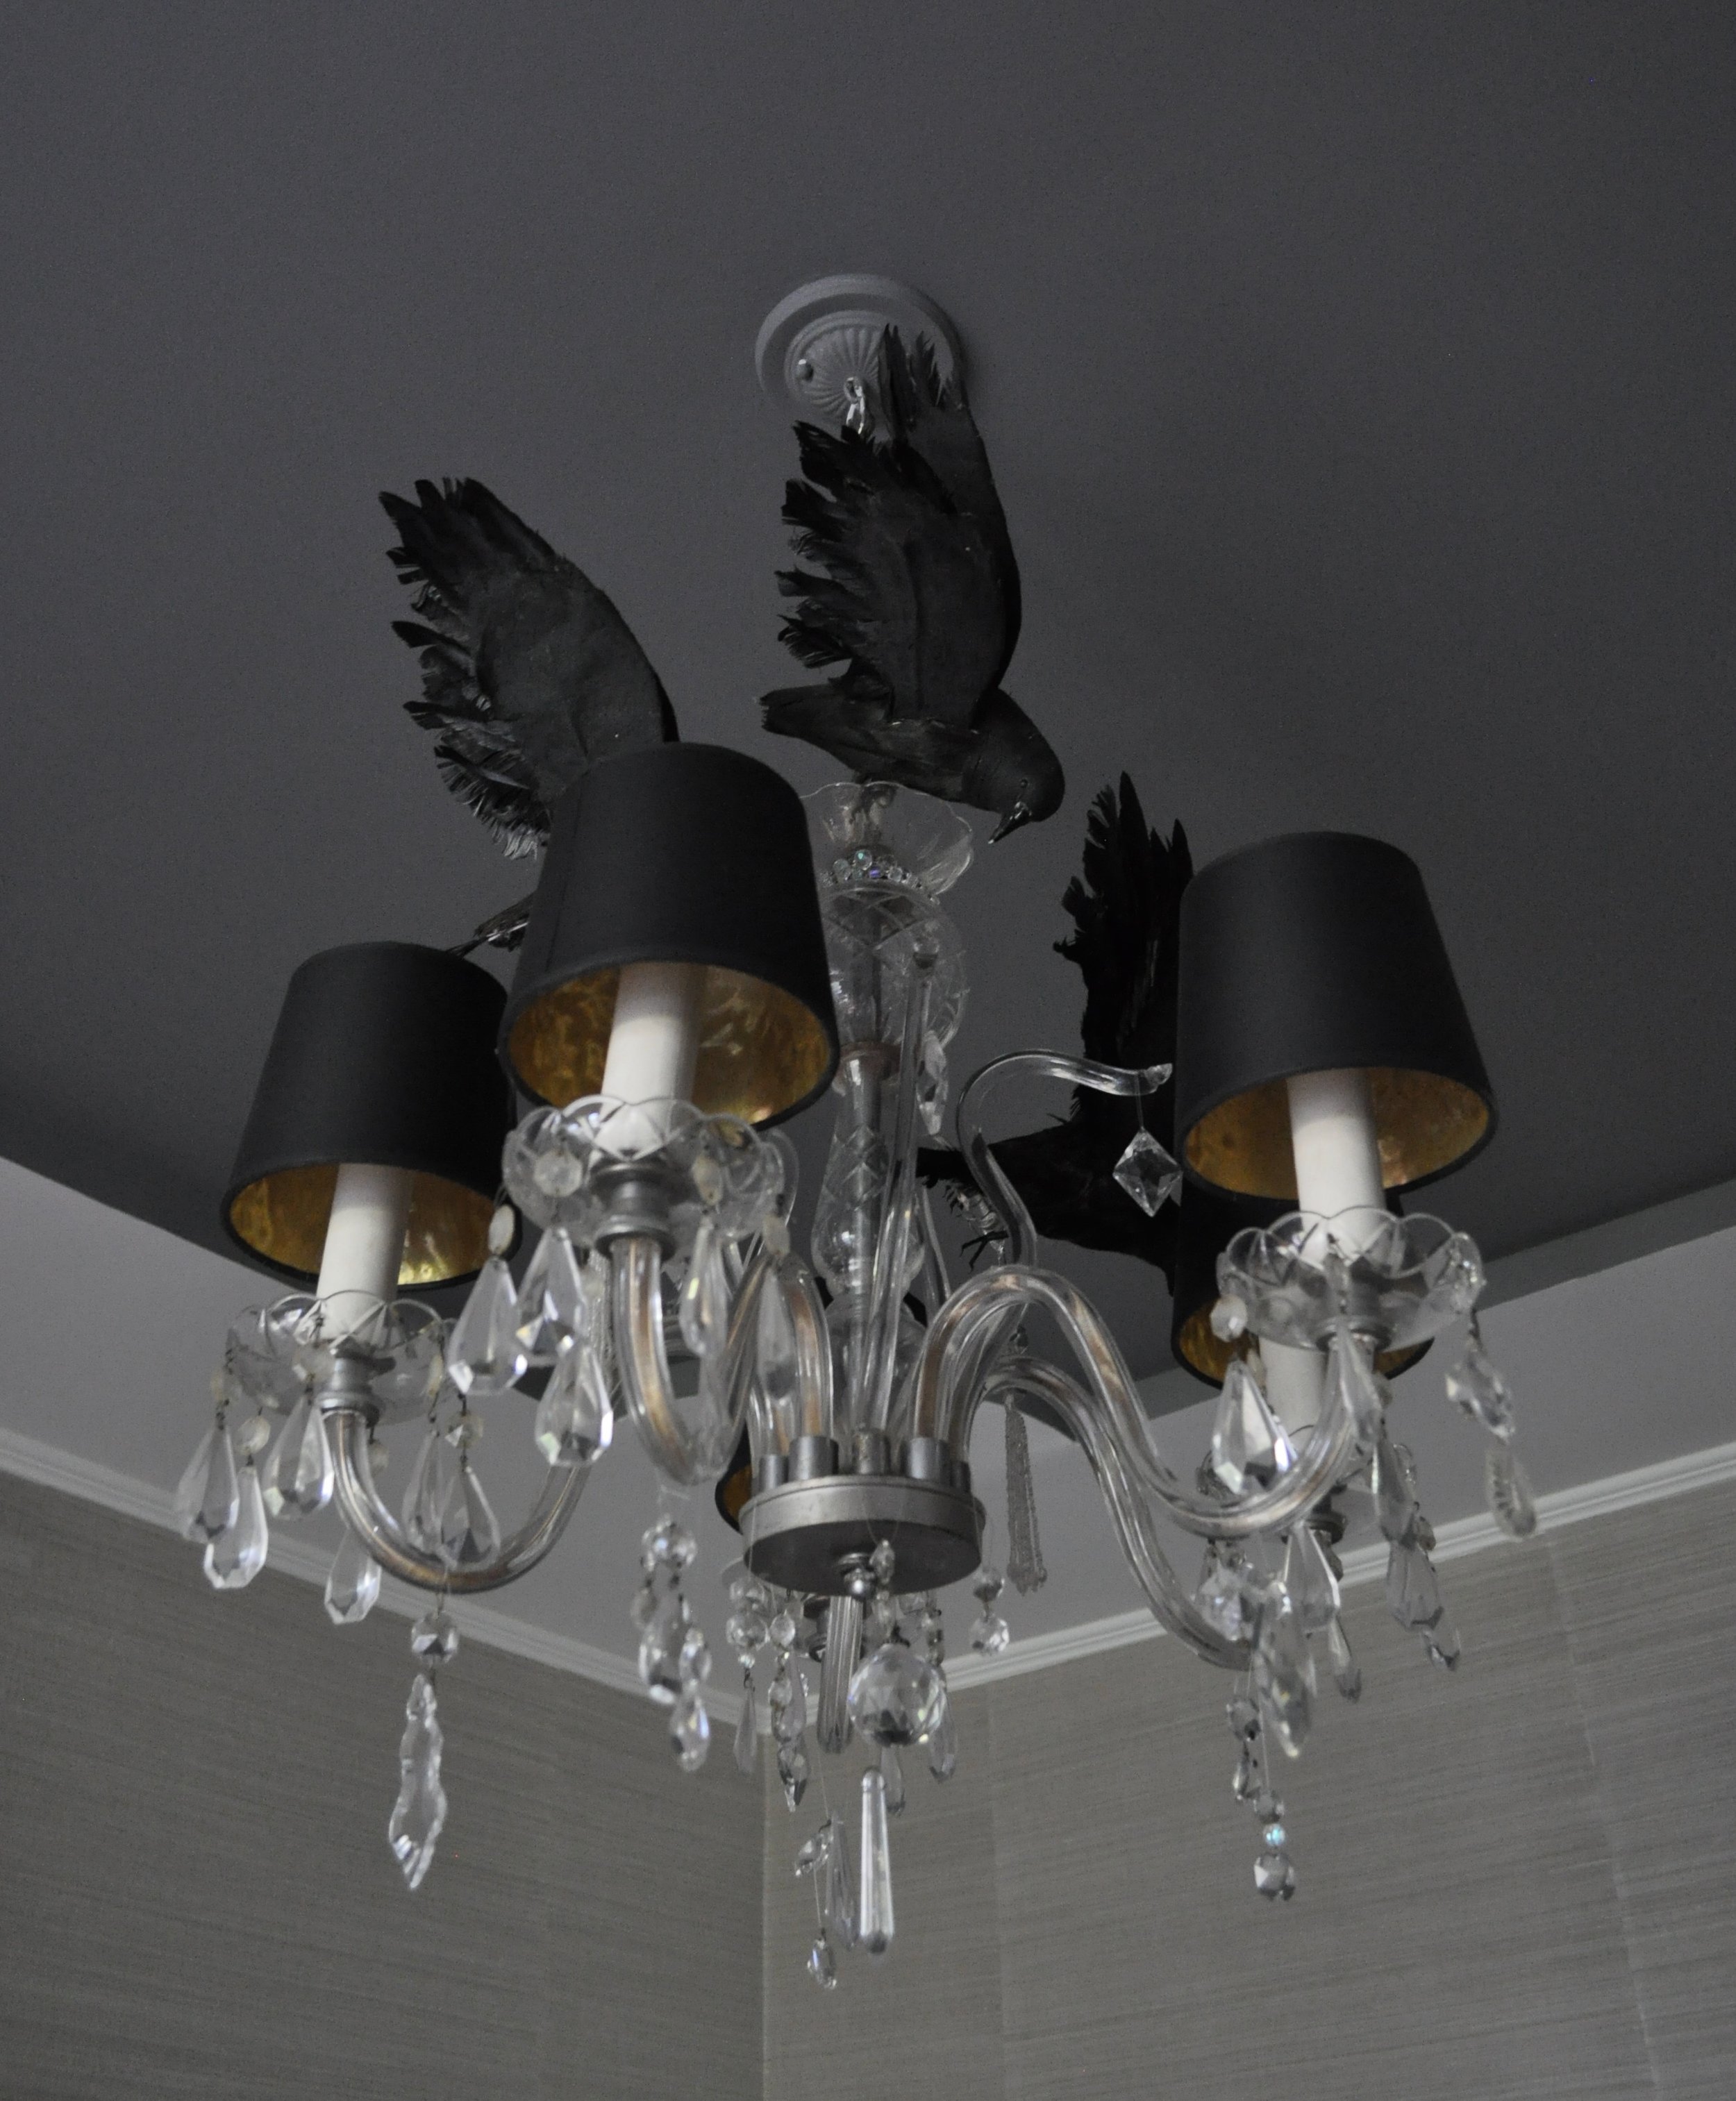 Crows circling the chandelier